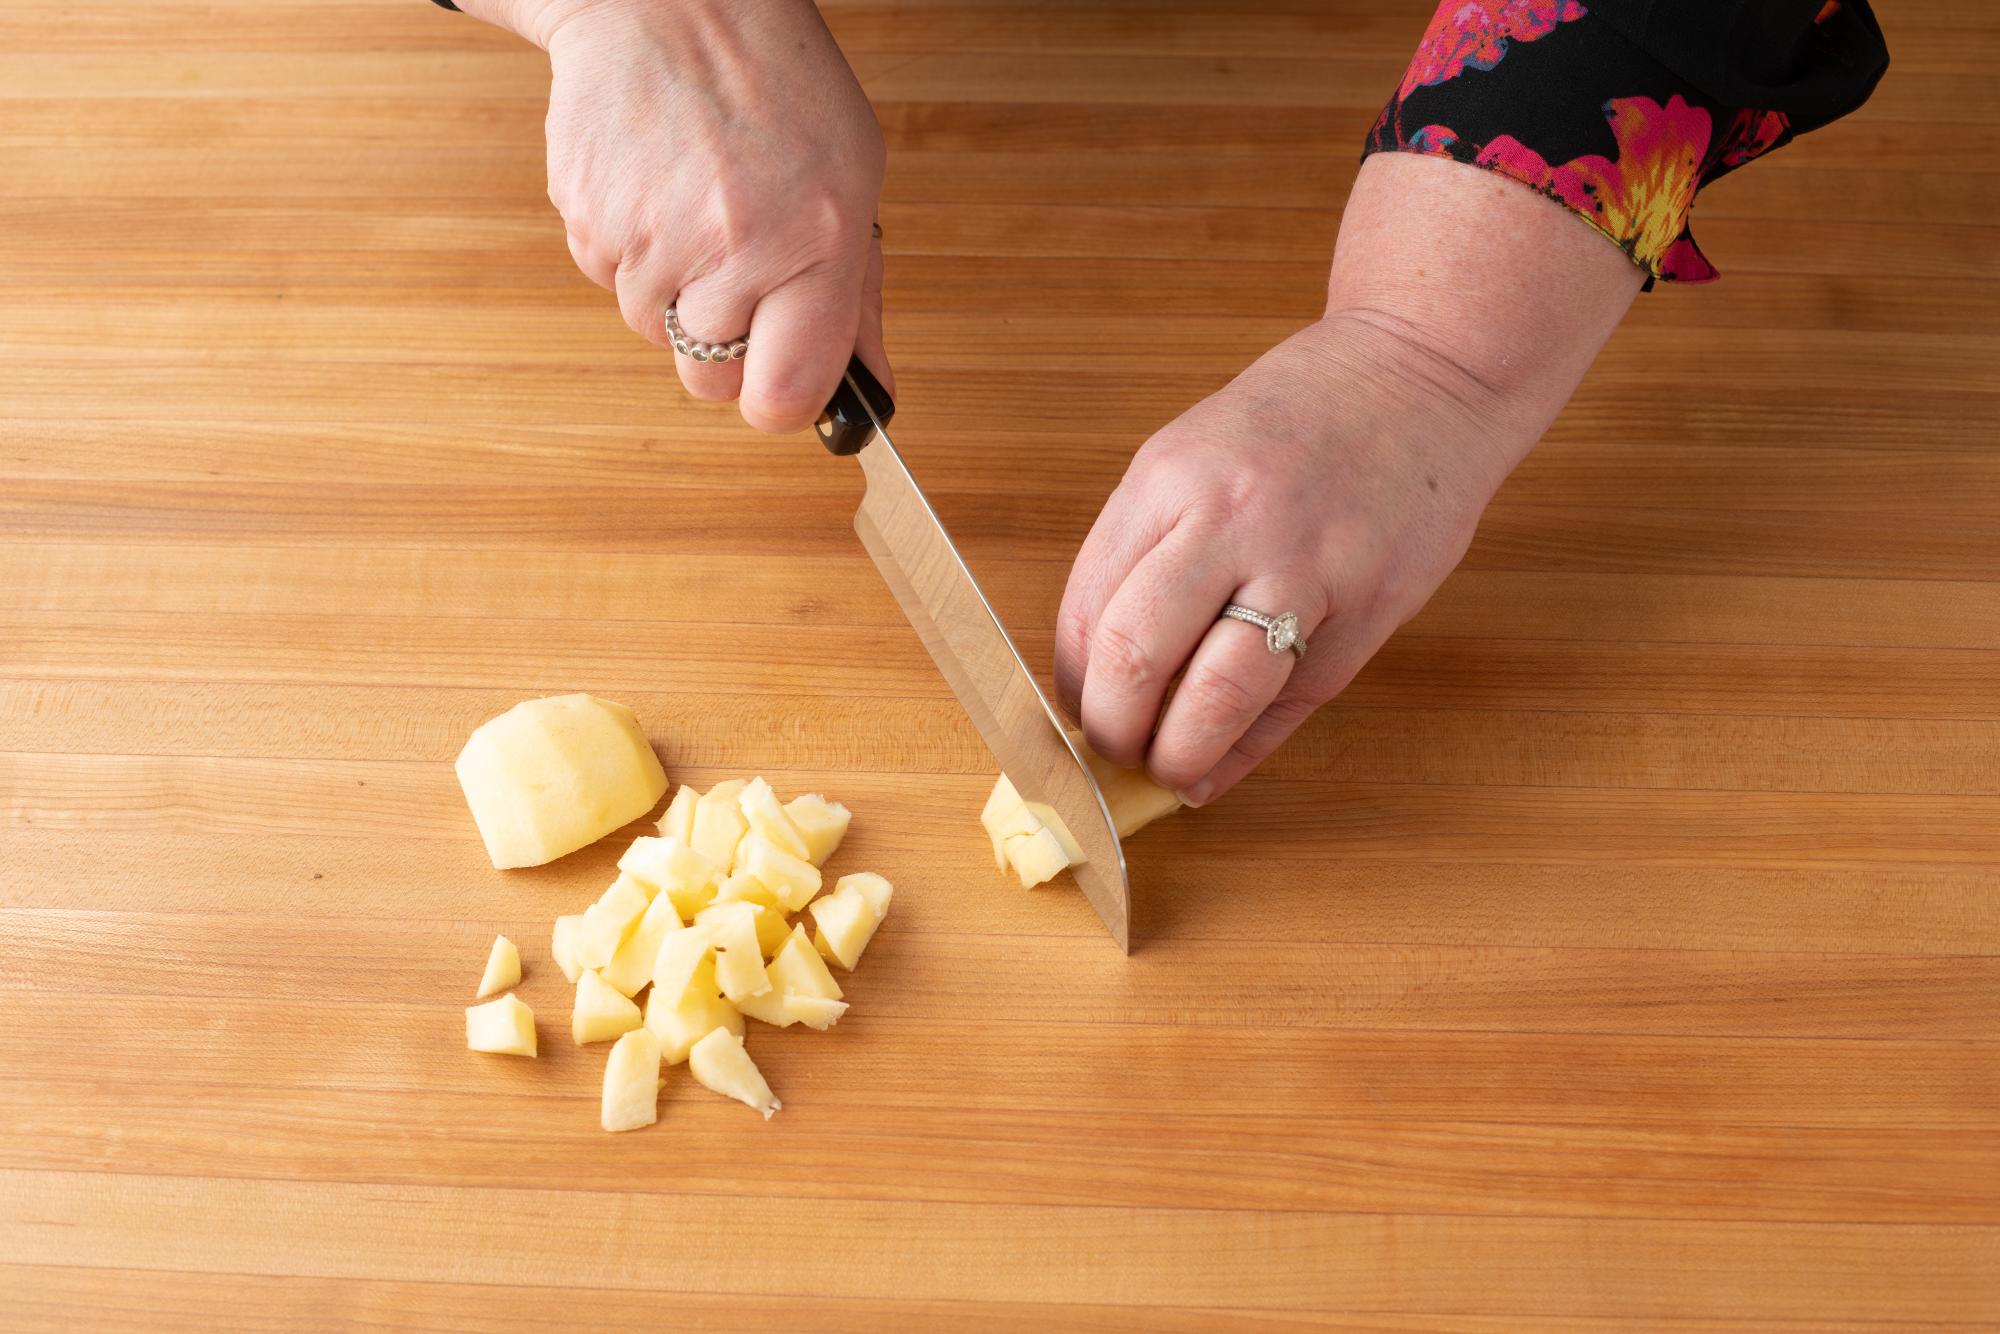 Dicing the apples with a Petite Santoku.